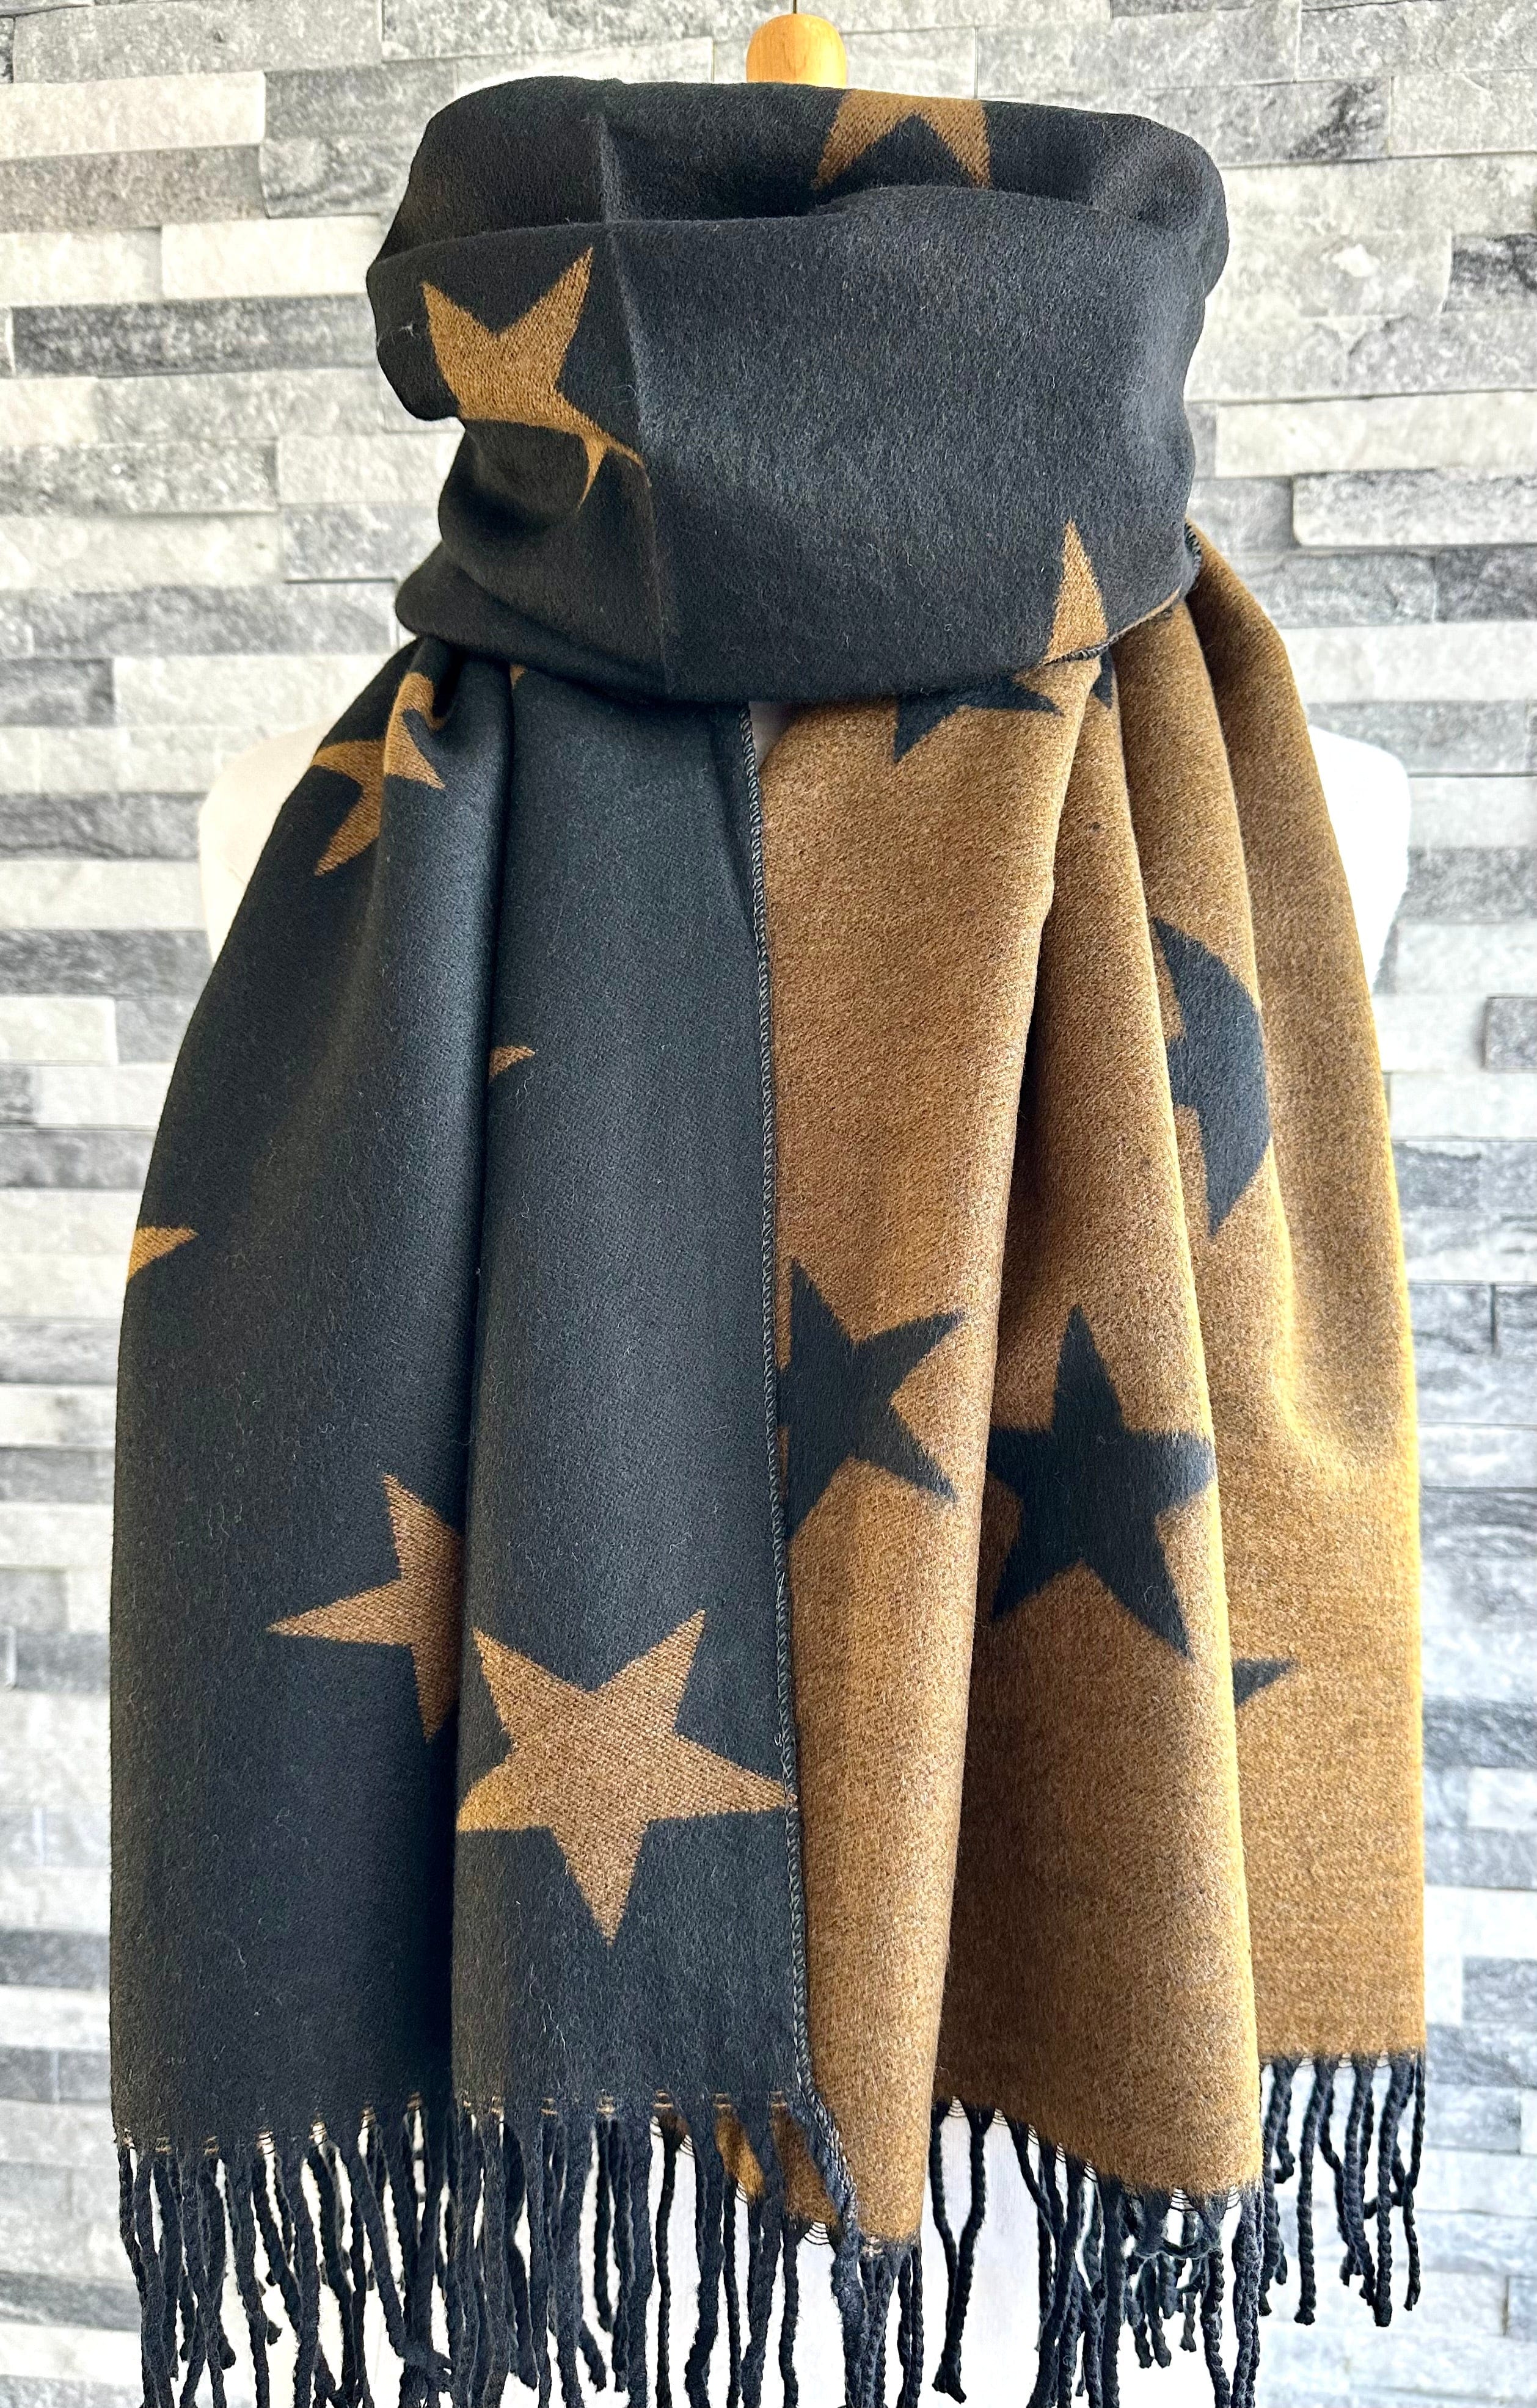 lusciousscarves Reversible Black and Brown Stars Scarf/Shawl Cashmere Blend